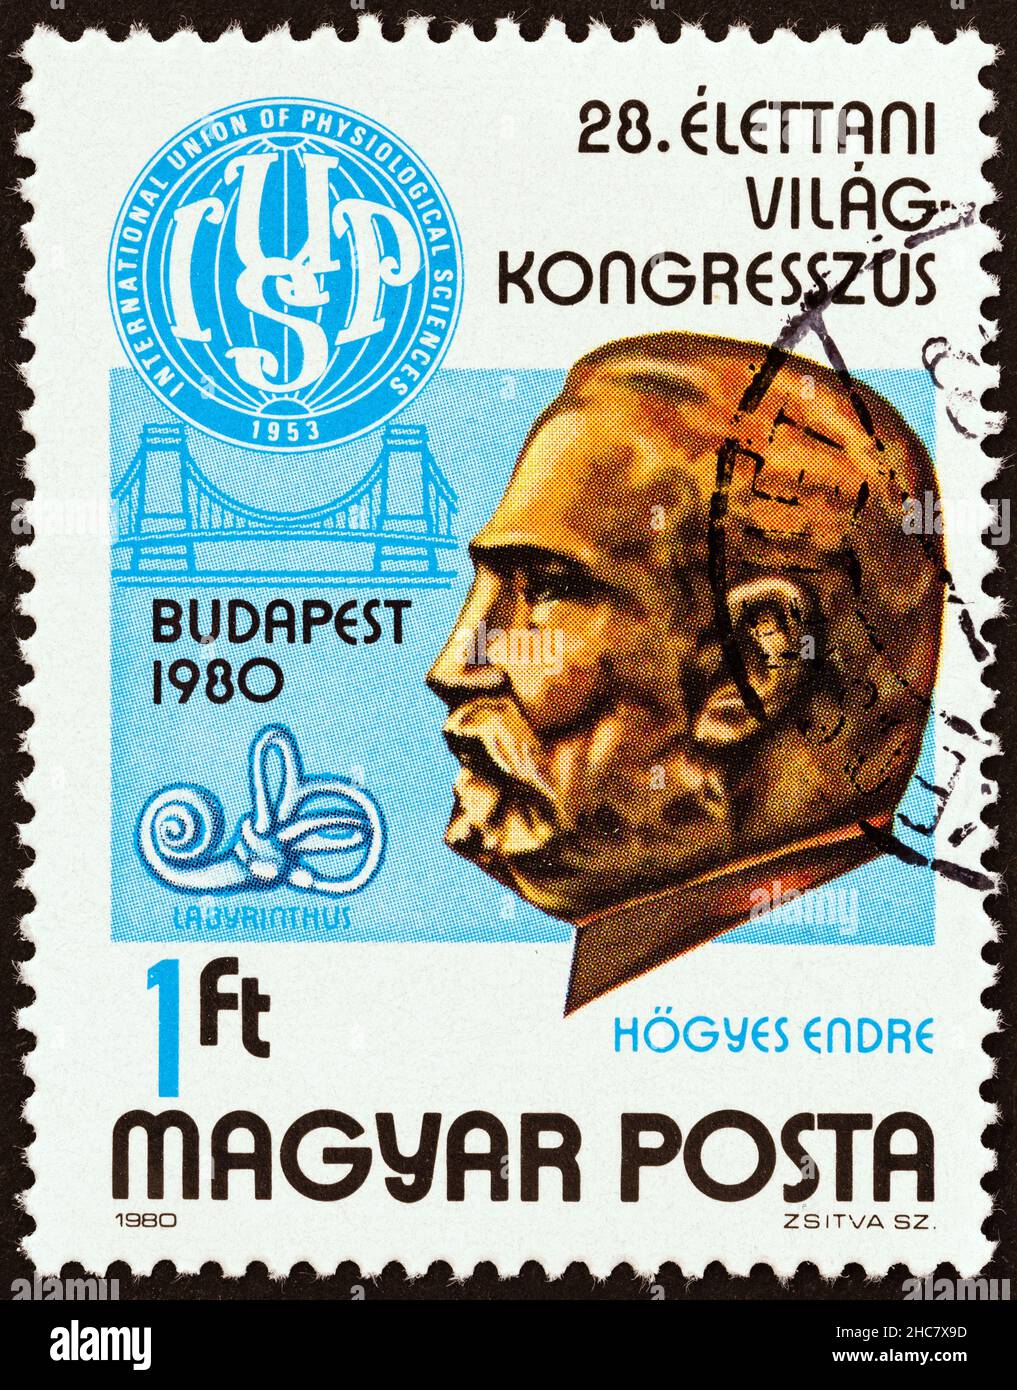 HUNGARY - CIRCA 1980: A stamp issued for the 28th International Congress of Physiological Sciences, Budapest shows Endre Hogyes (physician). Stock Photo